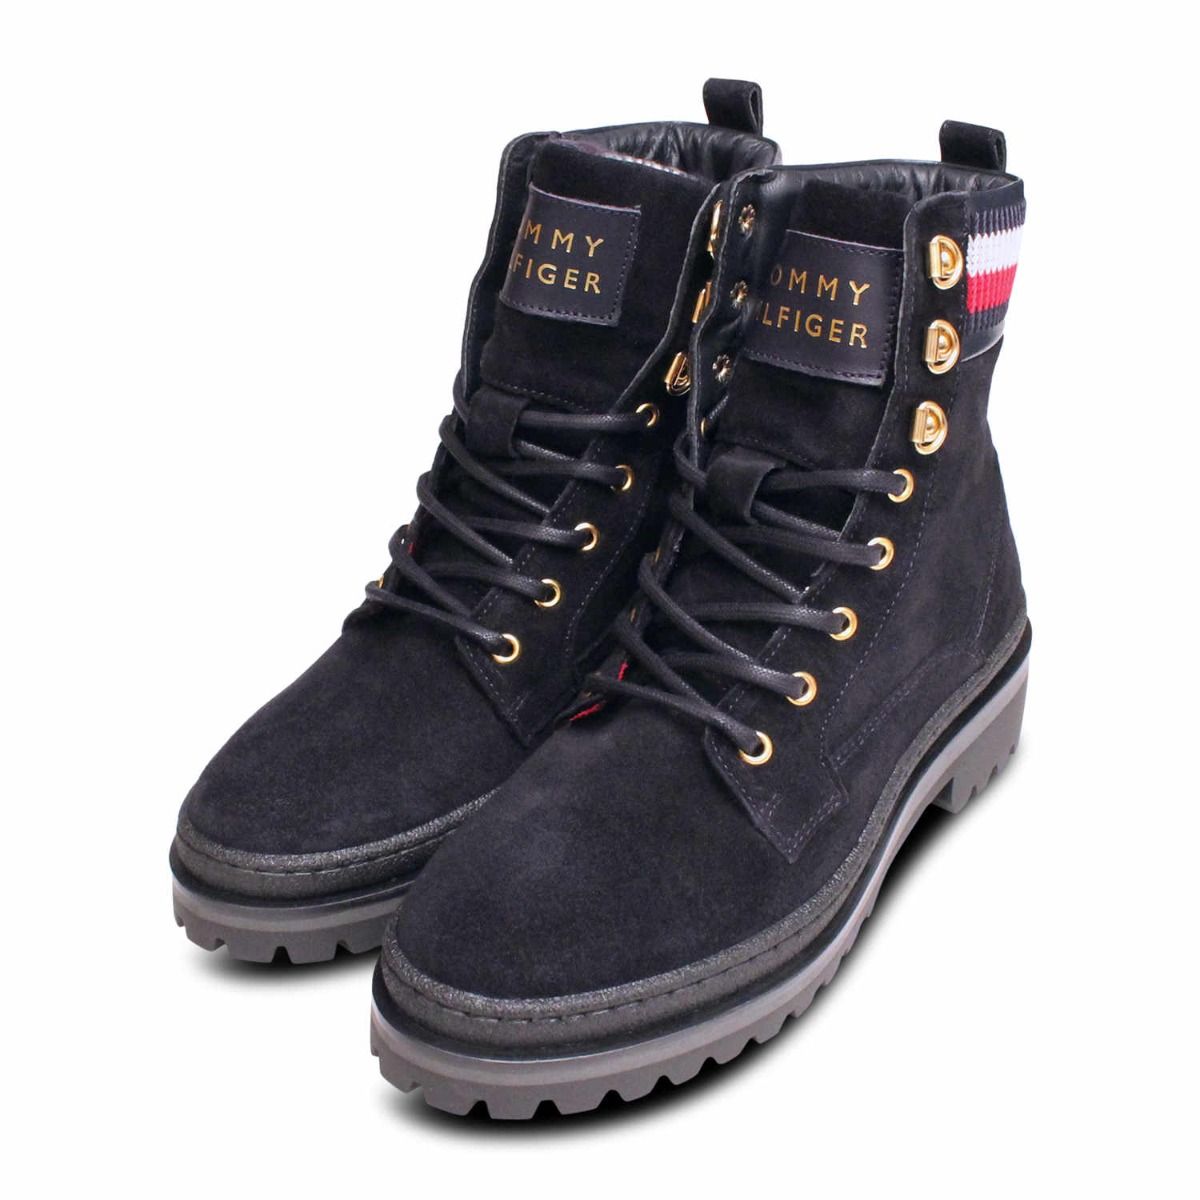 Dark Lace Navy Suede Tommy Blue Boots Hilfiger Up